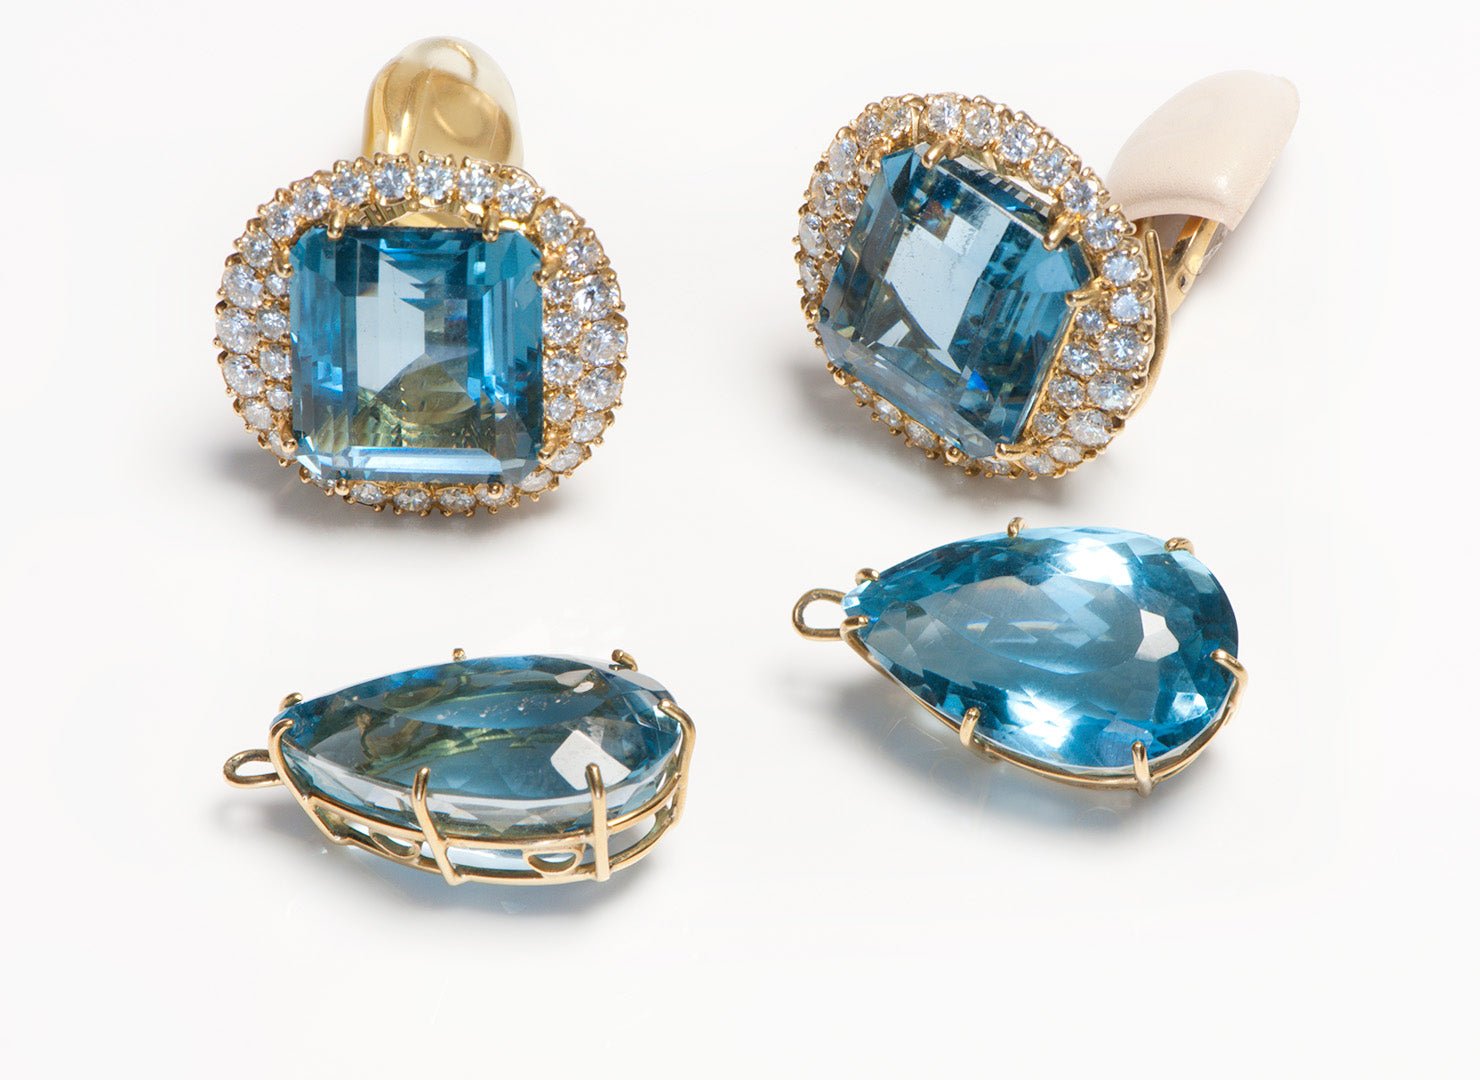 Blue Topaz Diamond Gold Earrings with Detachable Drops - DSF Antique Jewelry